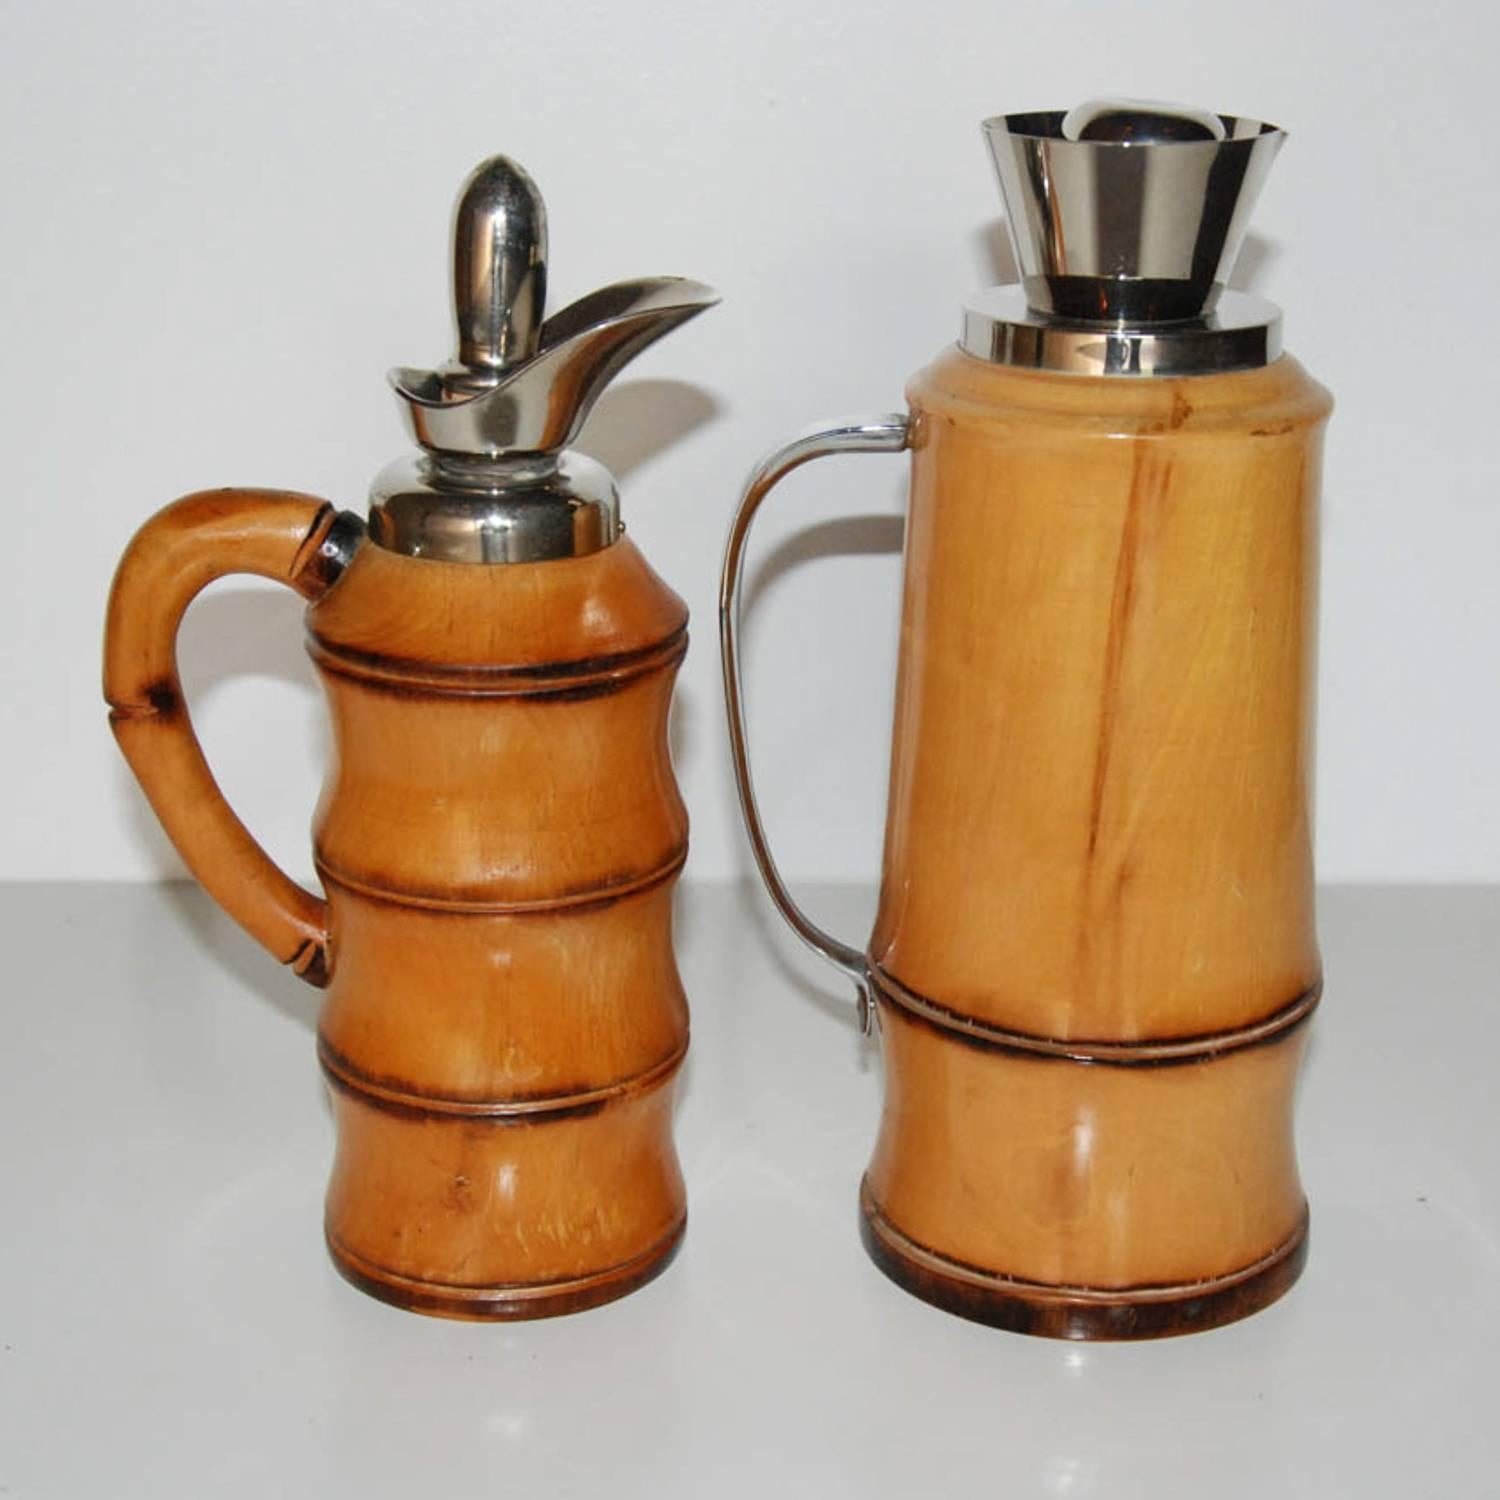 A pair of highly stylized bamboo inspired wood and chrome-plated cocktail shakers / decanters by Aldo Tura for Macabo. Excellent condition.